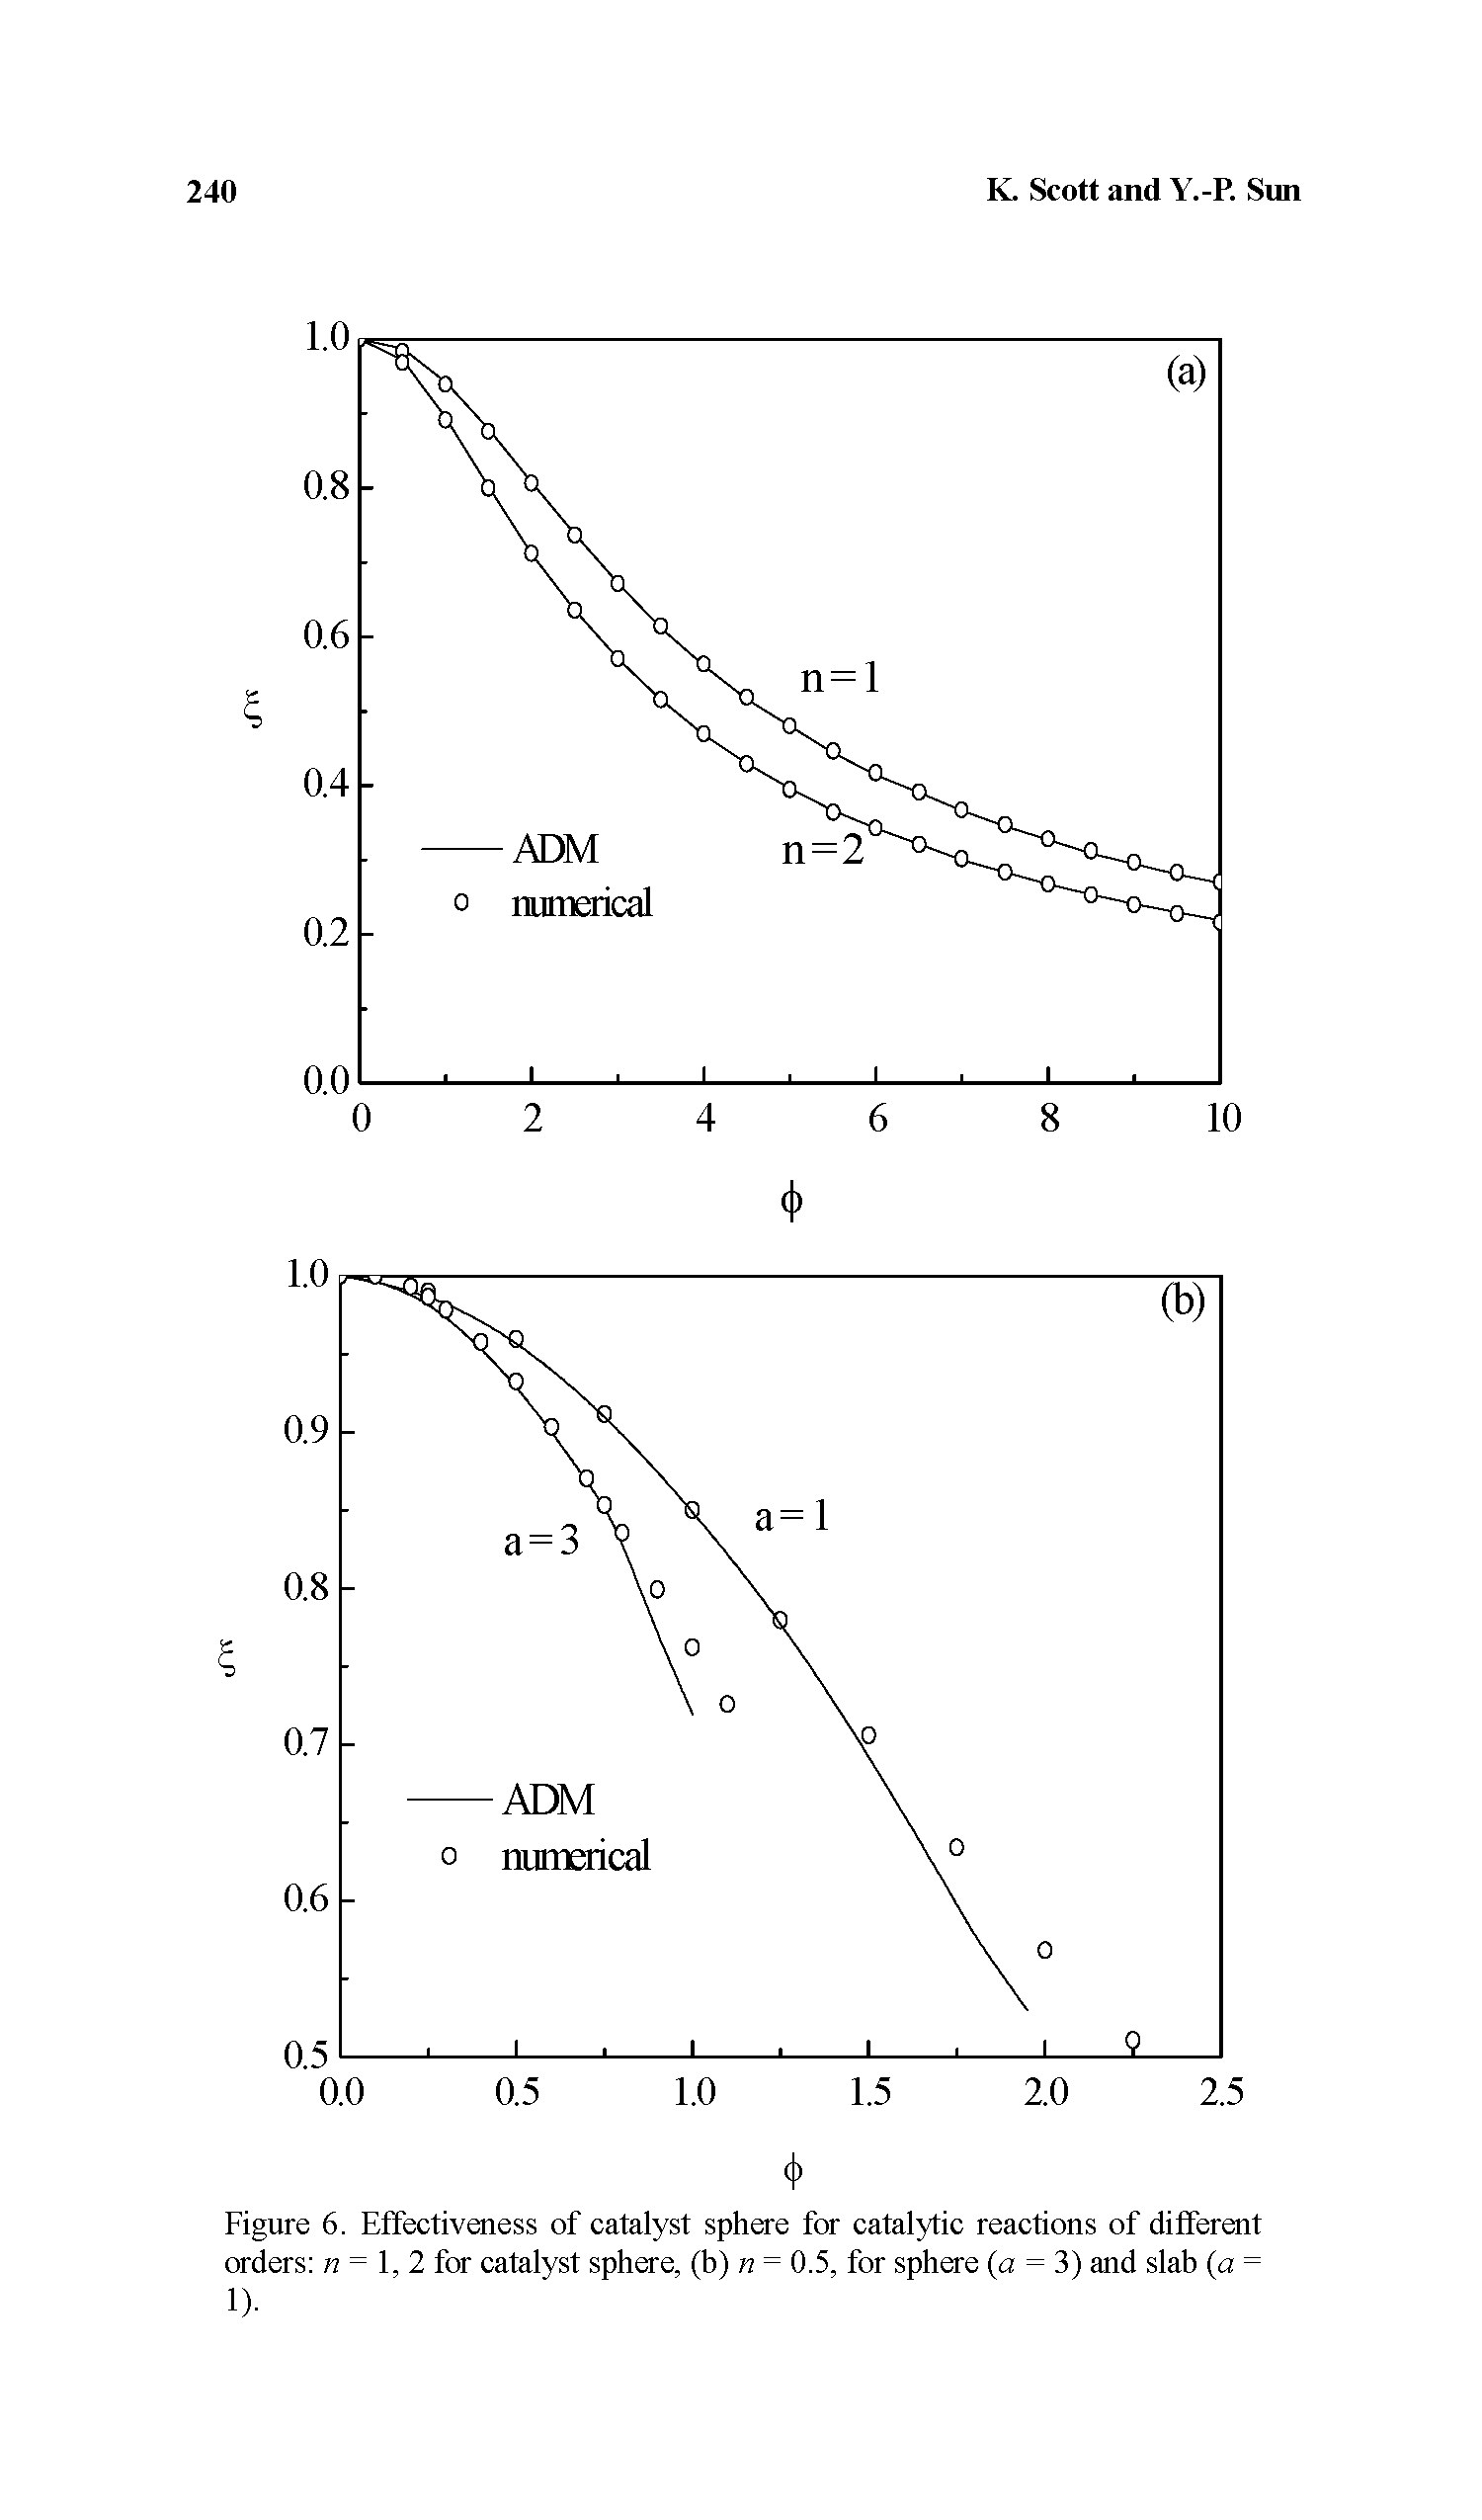 Figure 6. Effectiveness of catalyst sphere for catalytic reactions of different orders n = 1,2 for catalyst sphere, (b) n = 0.5, for sphere (a = 3) and slab (a = 1).